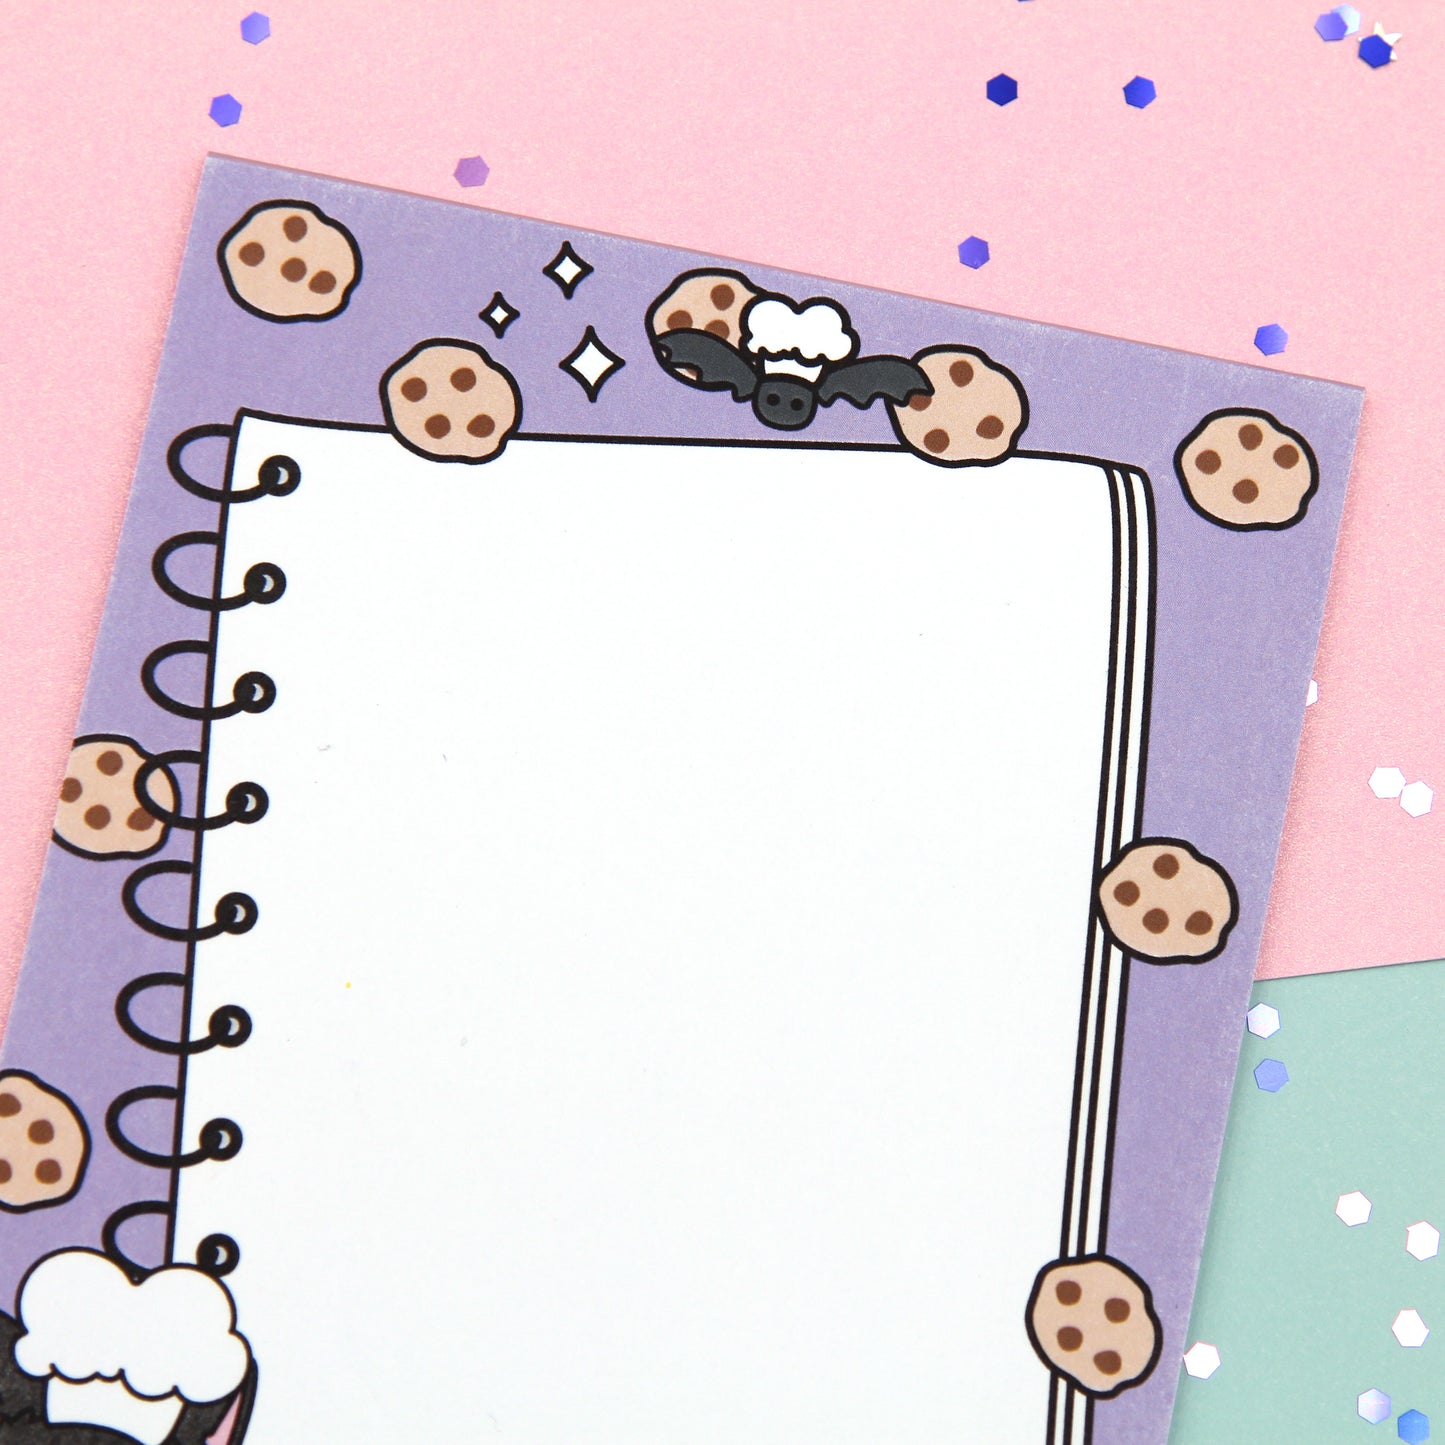 Baking Cookies 4" x 6" Memo Notepad - 25 Sheets - Boo and Lunar - Monty The Bat